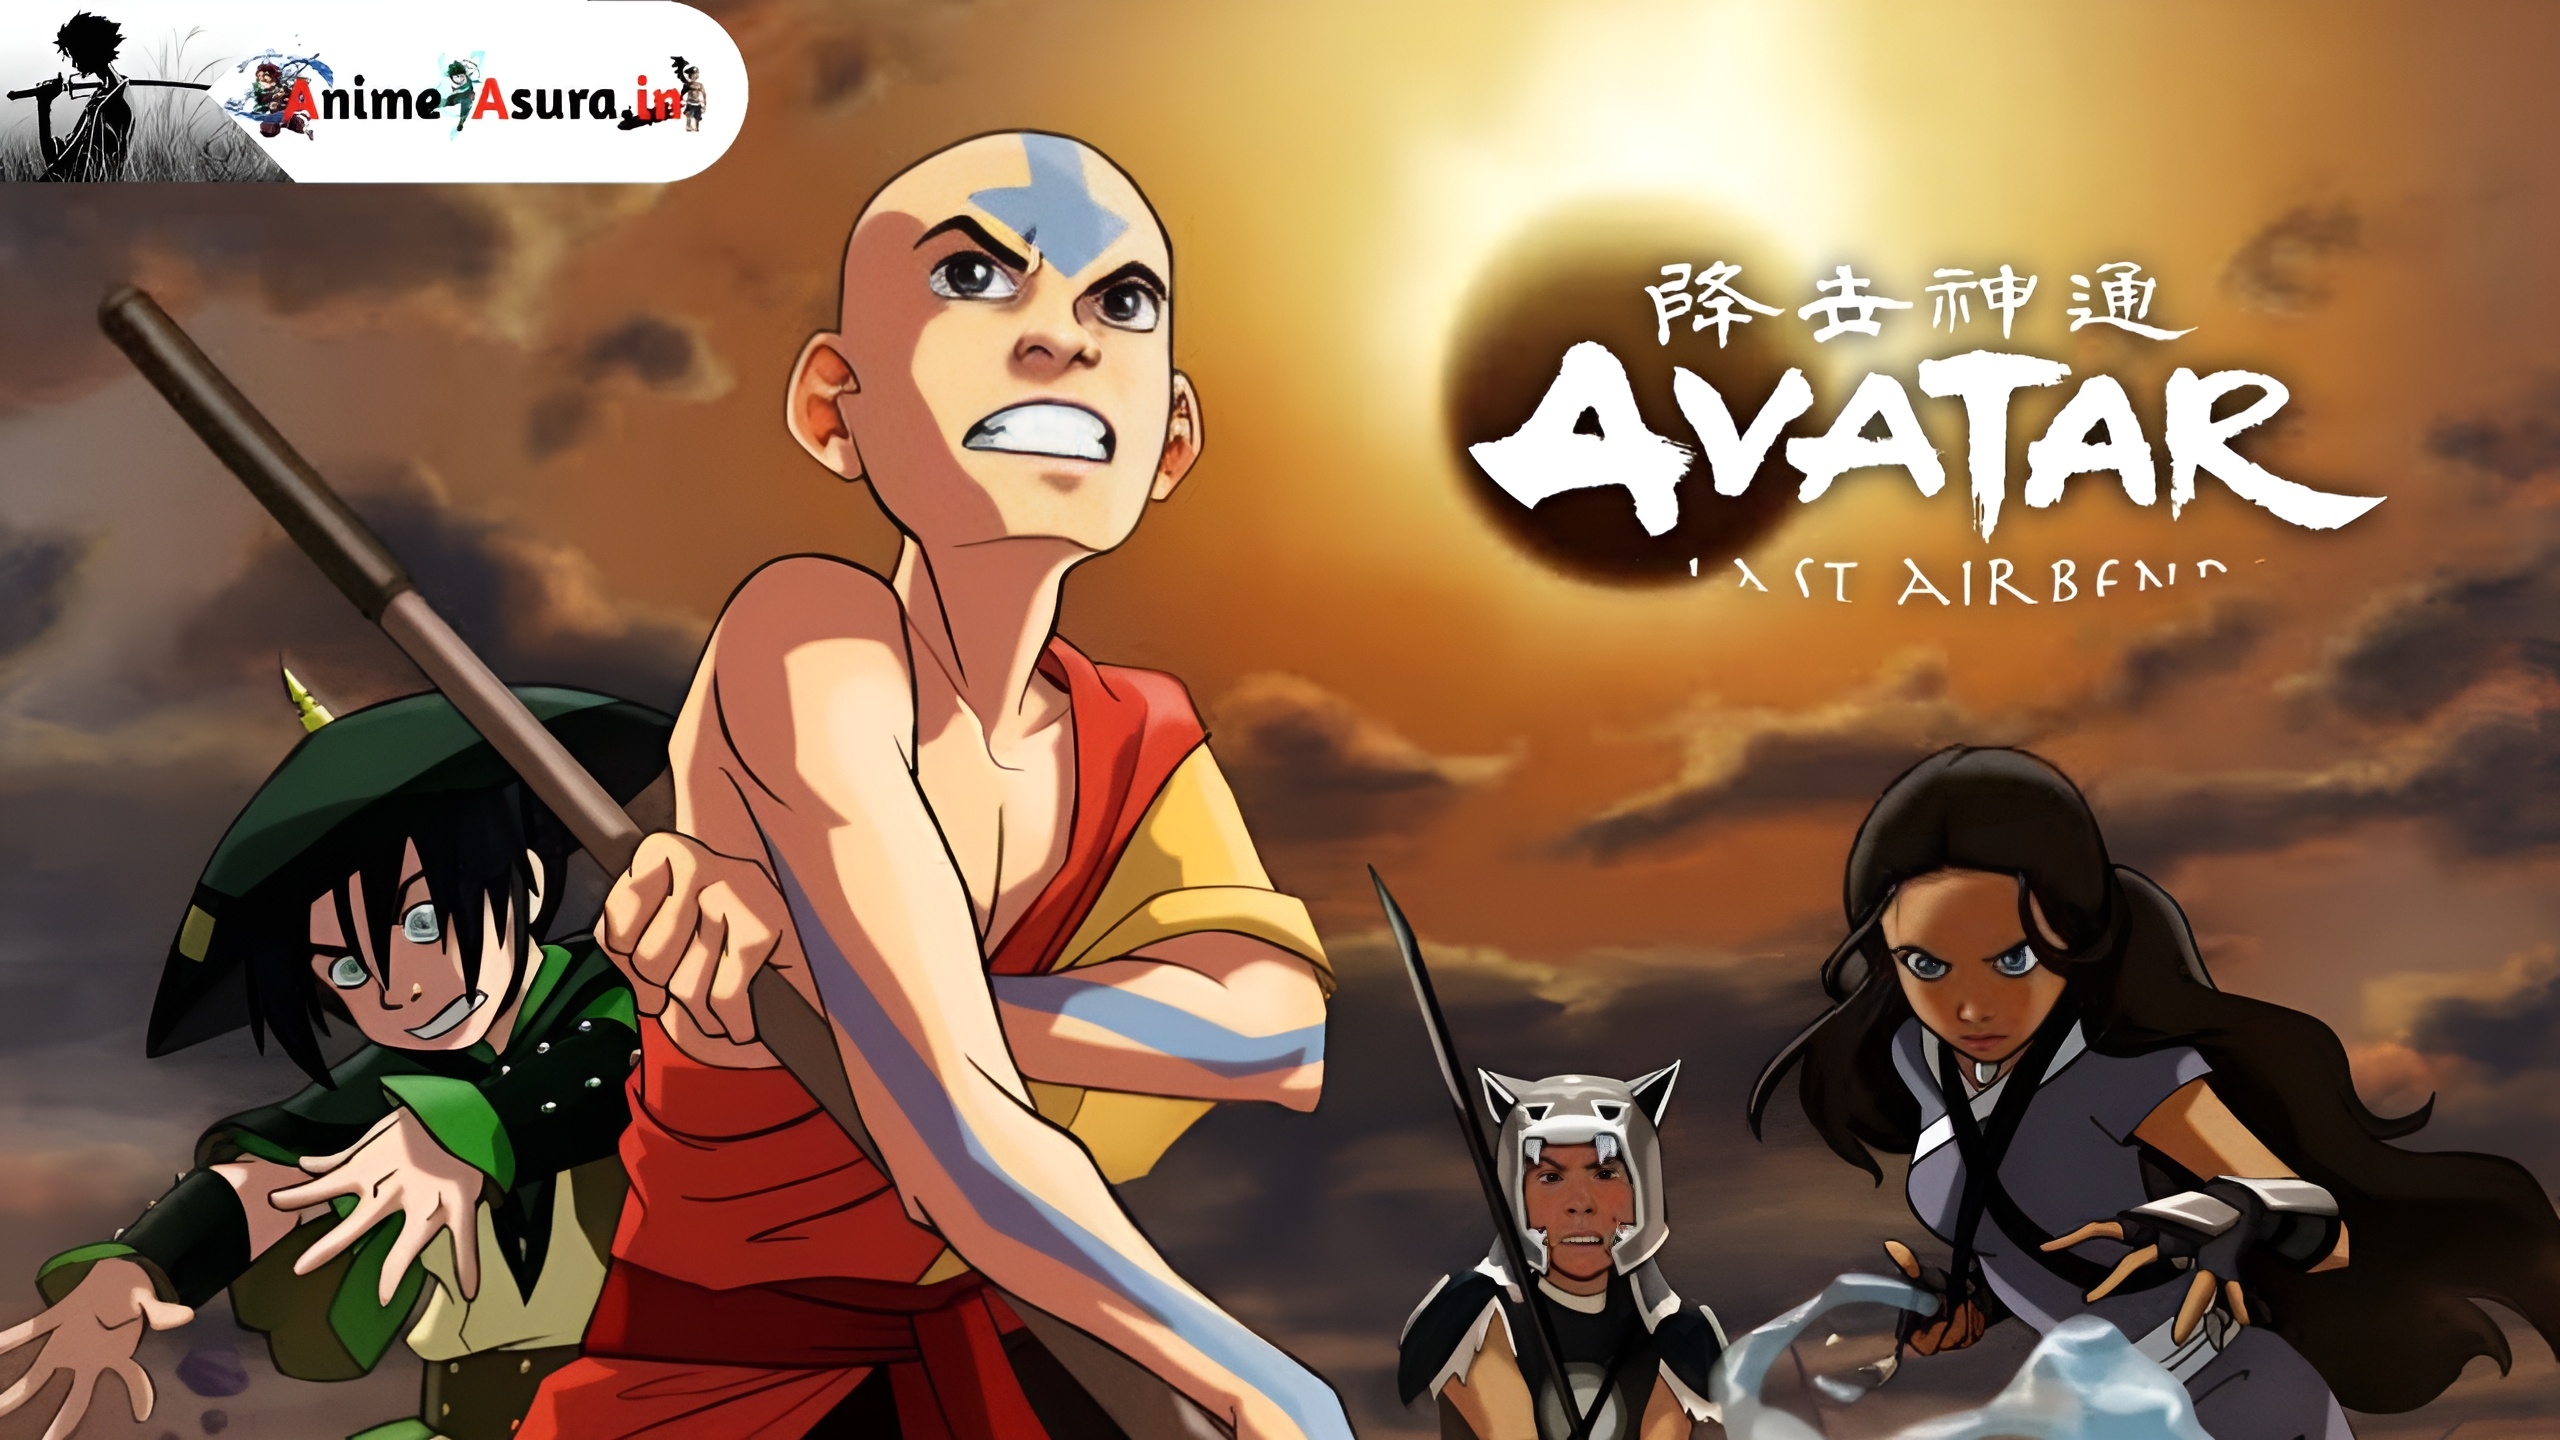 Avatar: The Last Airbender All Episodes In Hindi